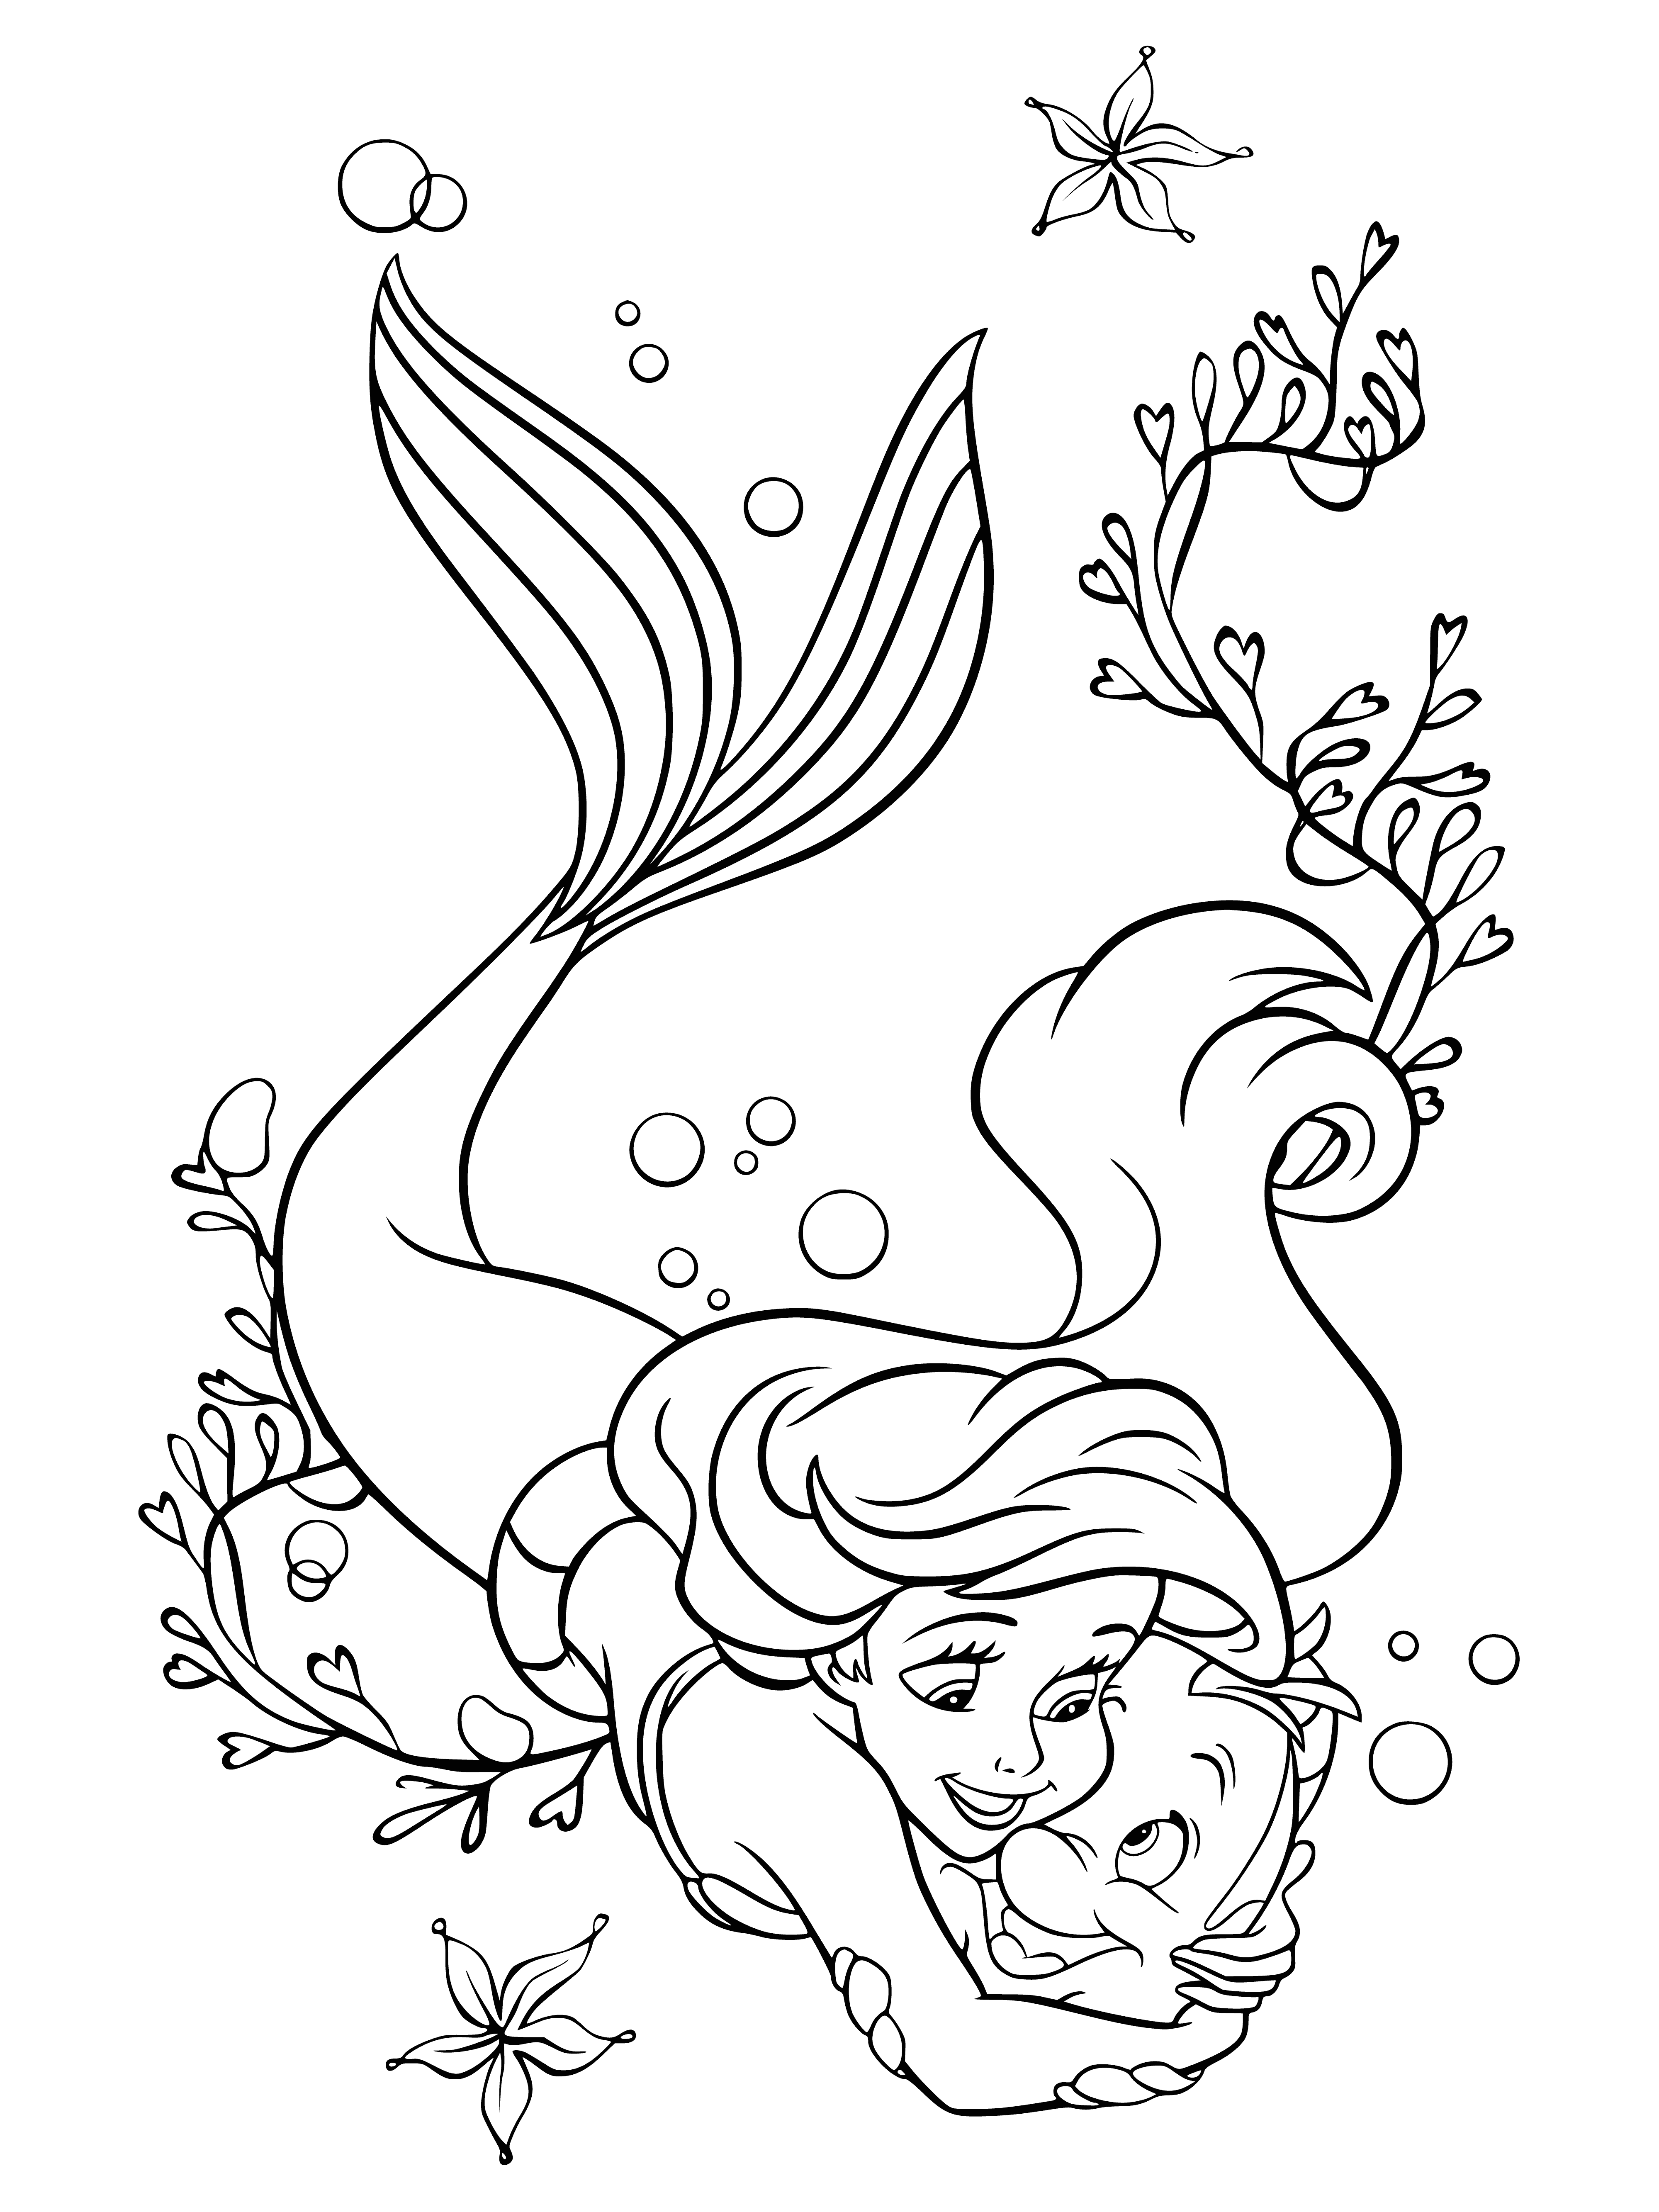 coloring page: Mermaid in water sitting on rock w/ blue tail, wearing purple top. Flounder swimming next to her, orange w/ yellow spots.